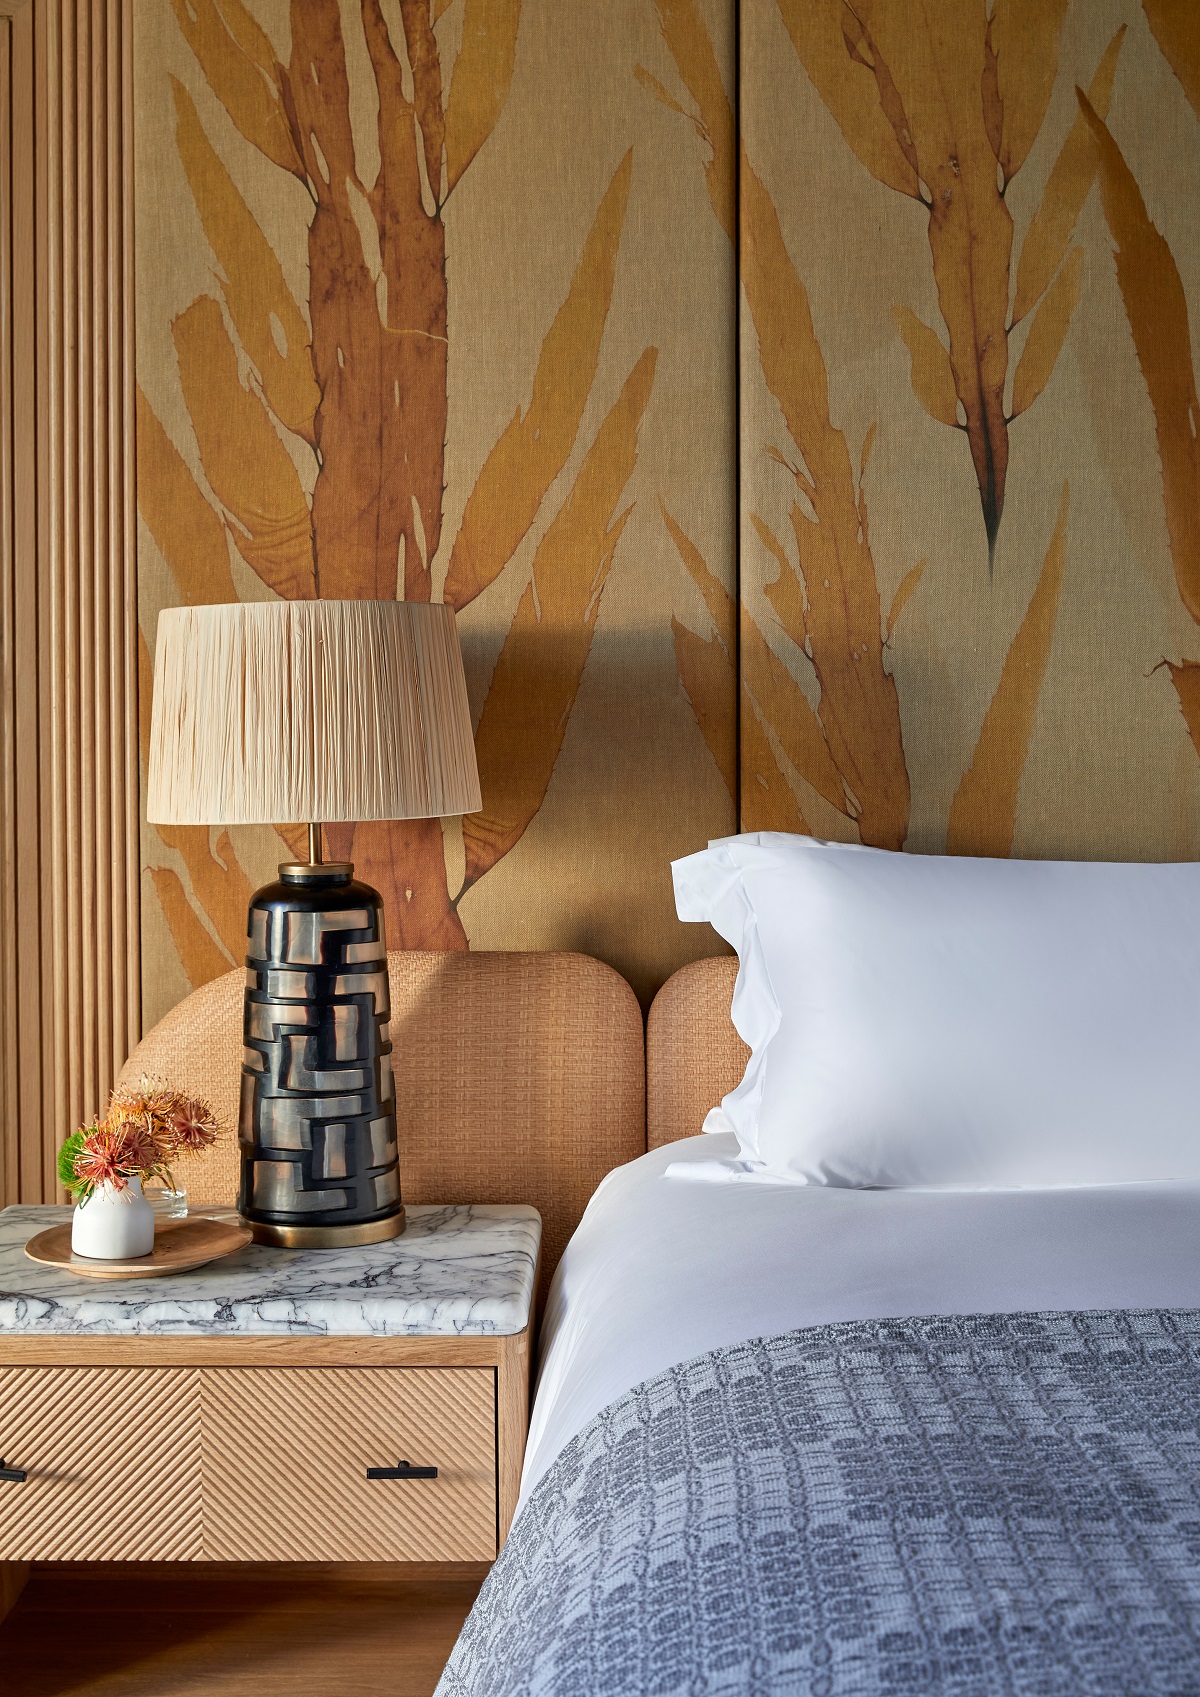 guestroom at One&Only Cape Town with design details by Muza Lab of wallpaper inspired by kelp and handmade crafts next to the bed